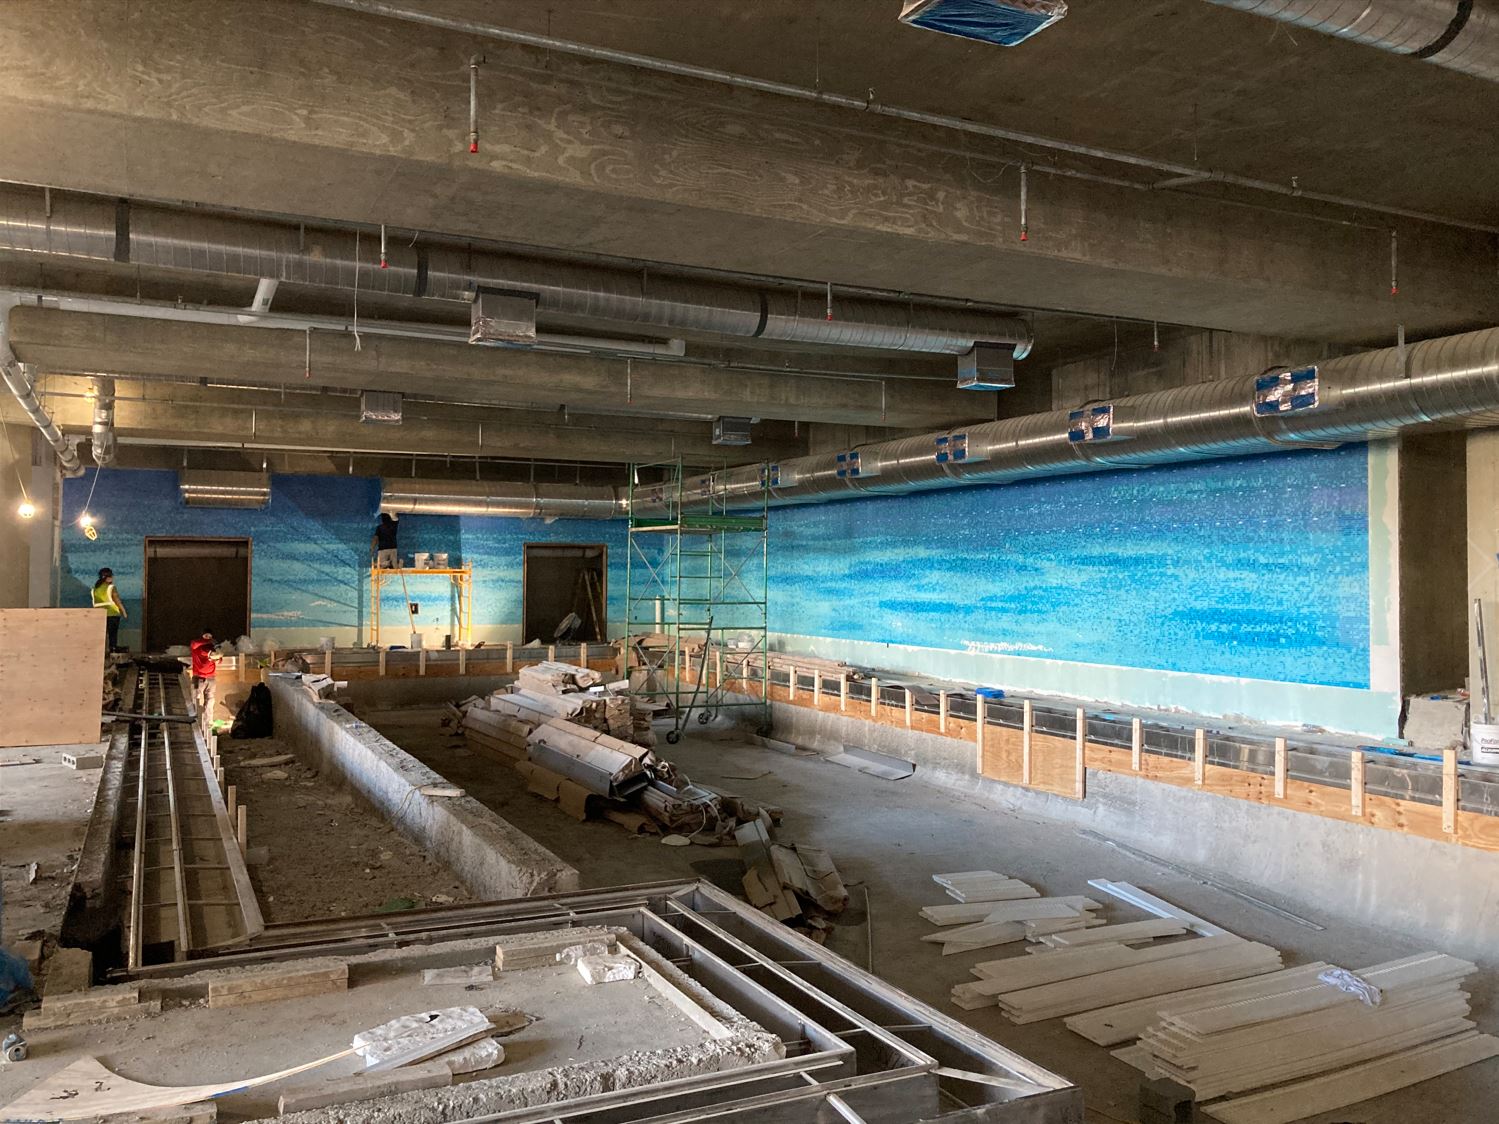 View of recreation pool under construction.